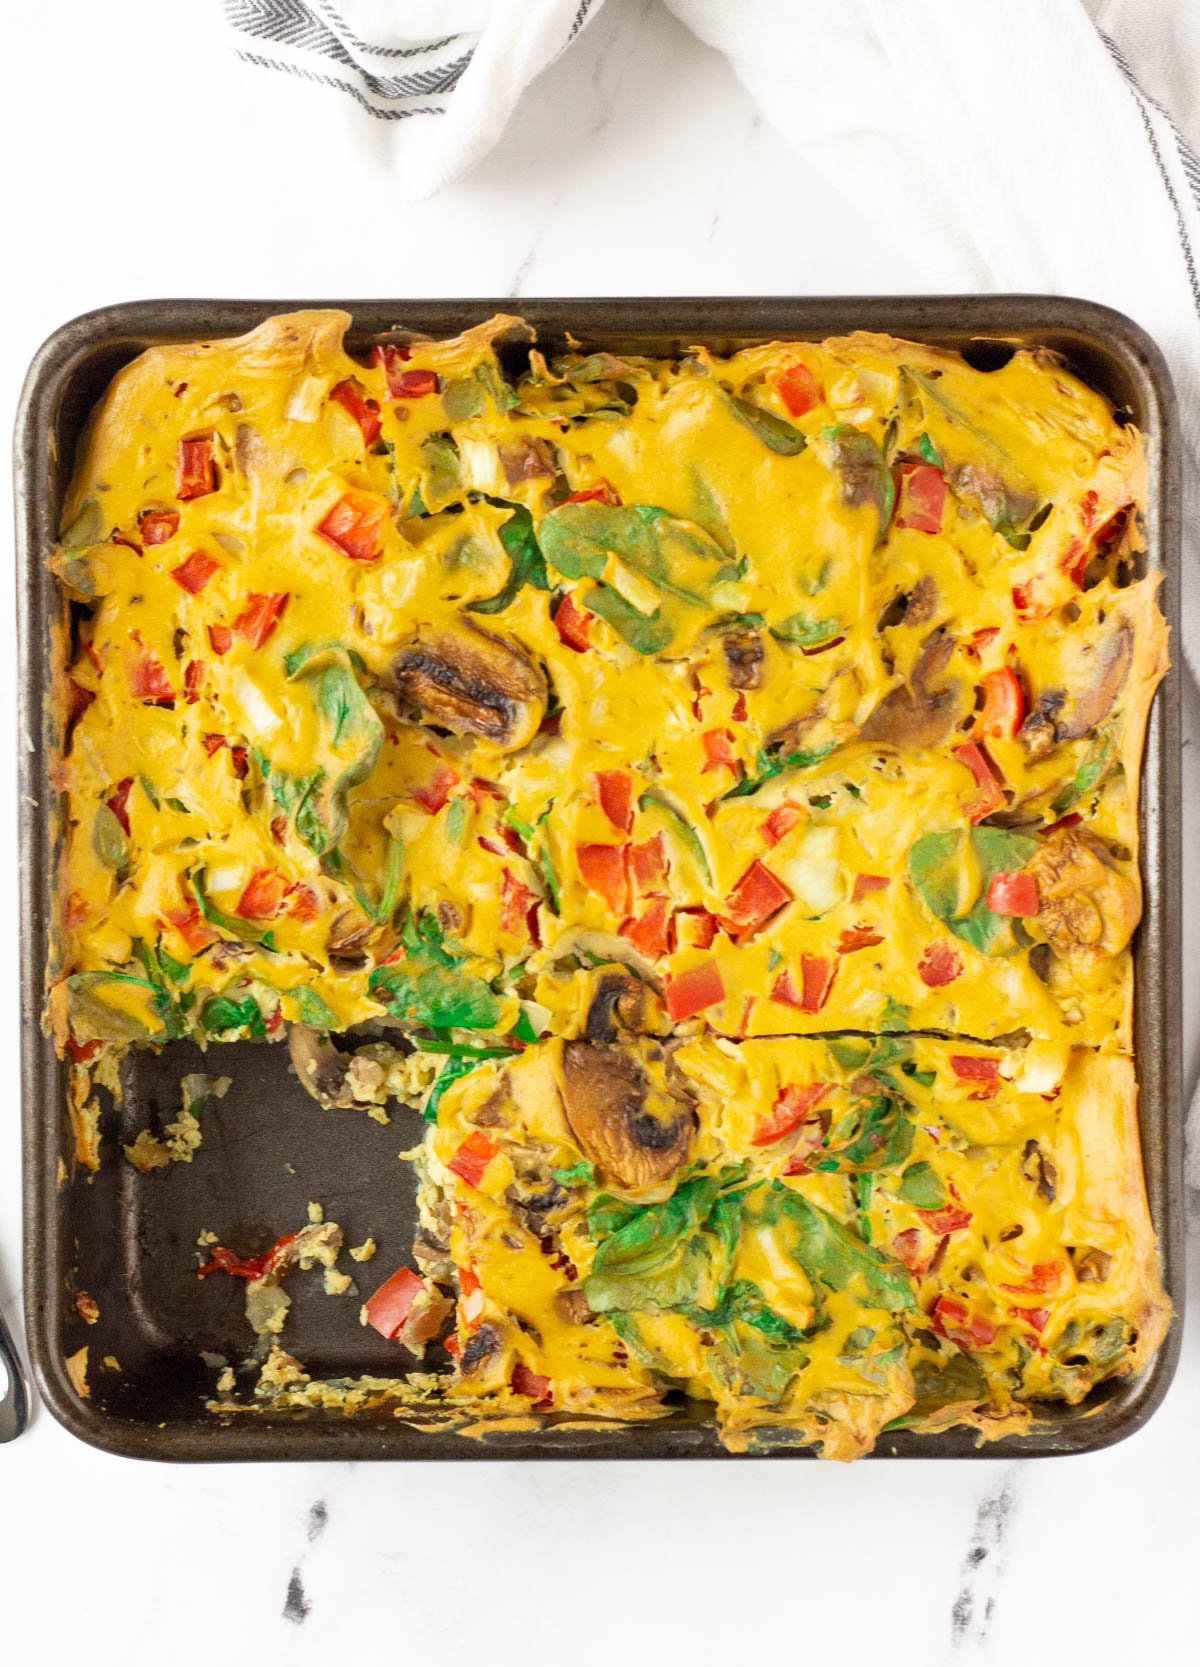 vegan breakfast egg casserole with mushrooms, peppers, and spinach